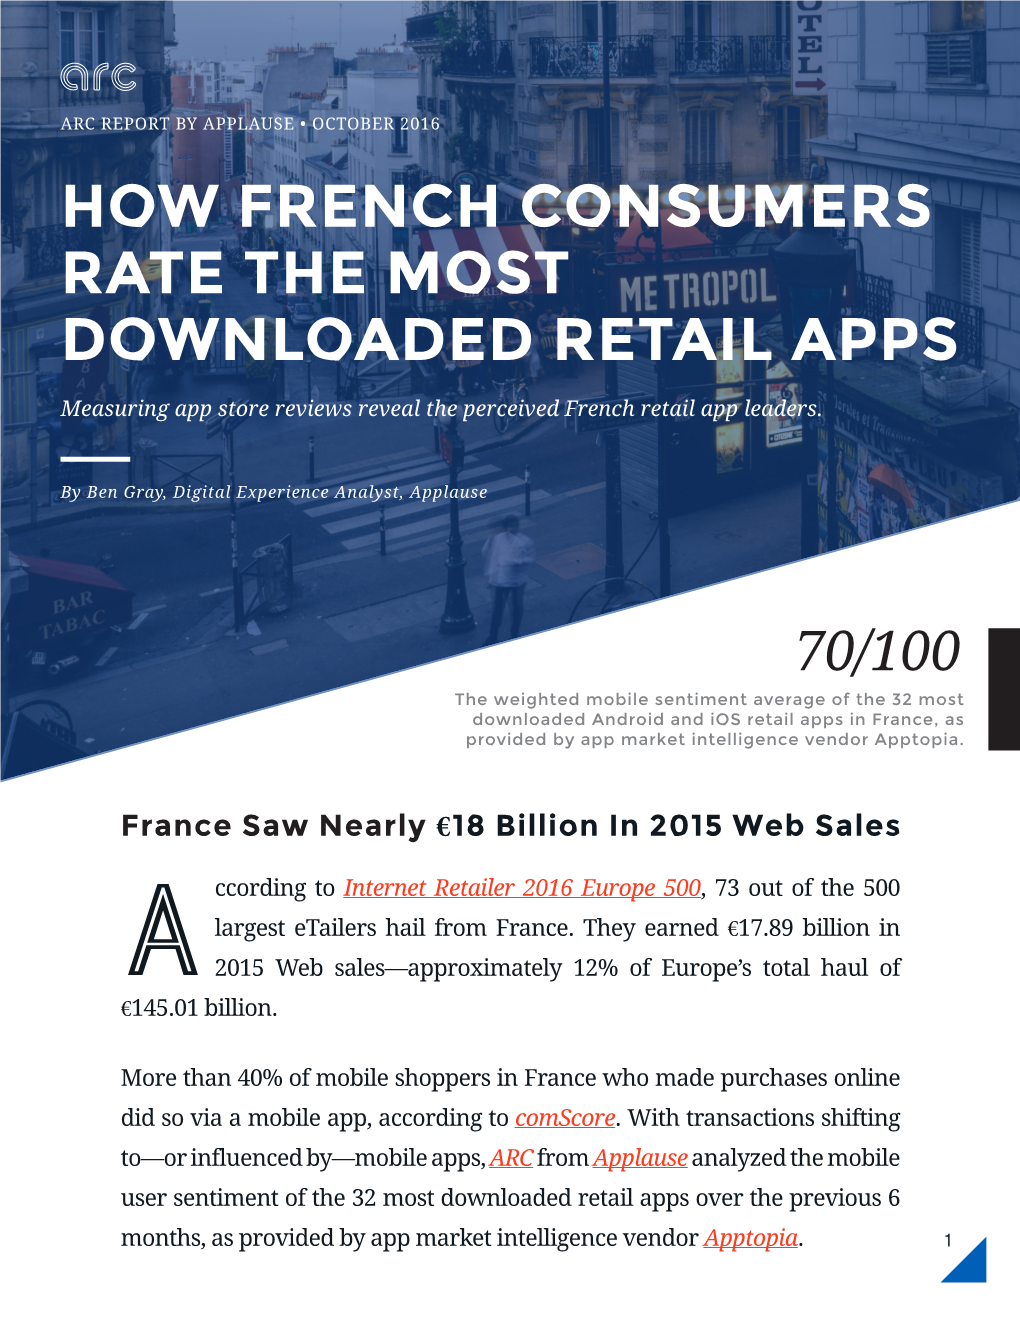 How French Consumers Rate the Most Downloaded Retail Apps